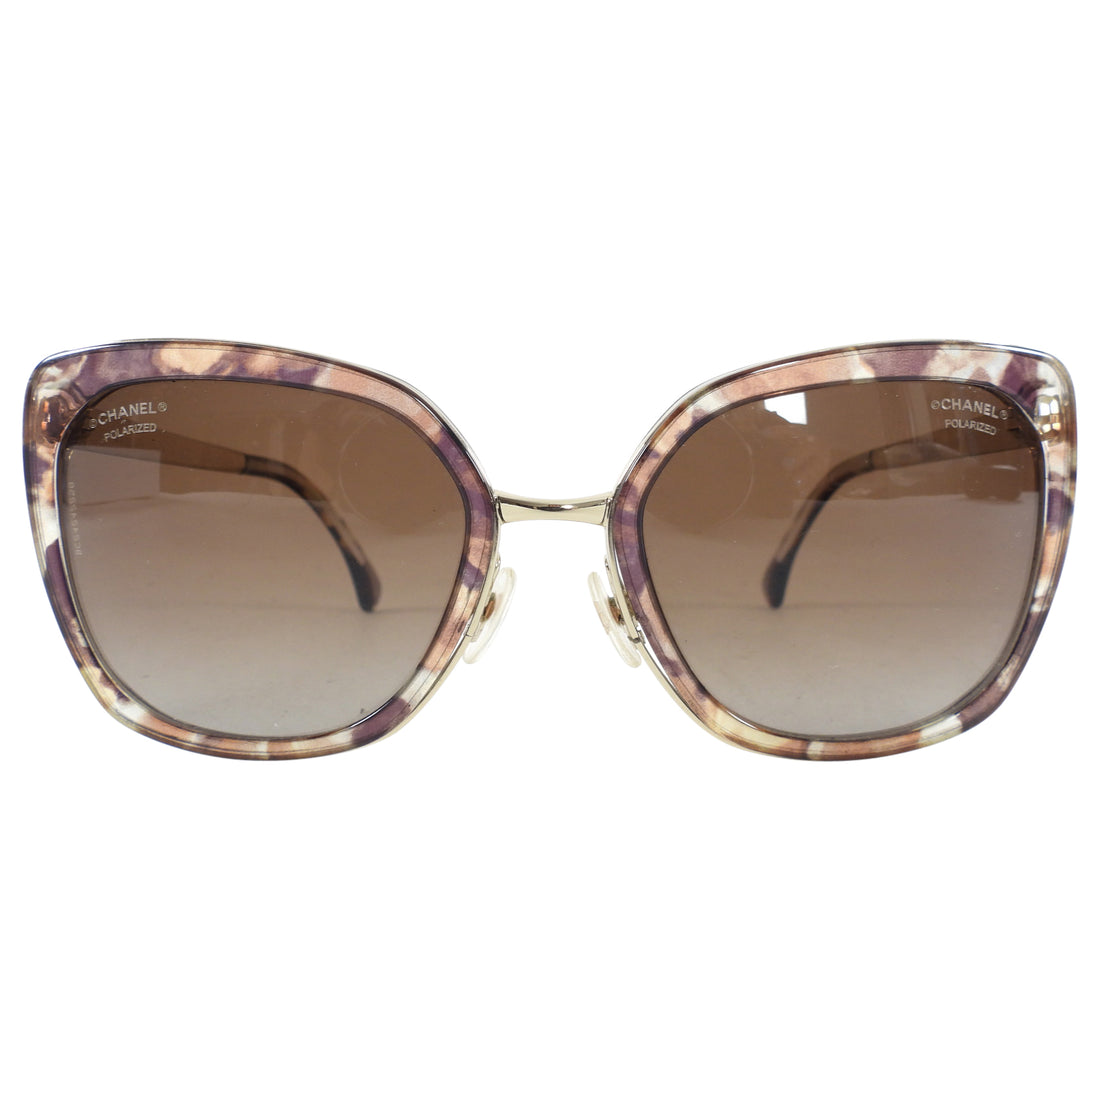 Chanel Brown and Light Gold Sunglasses